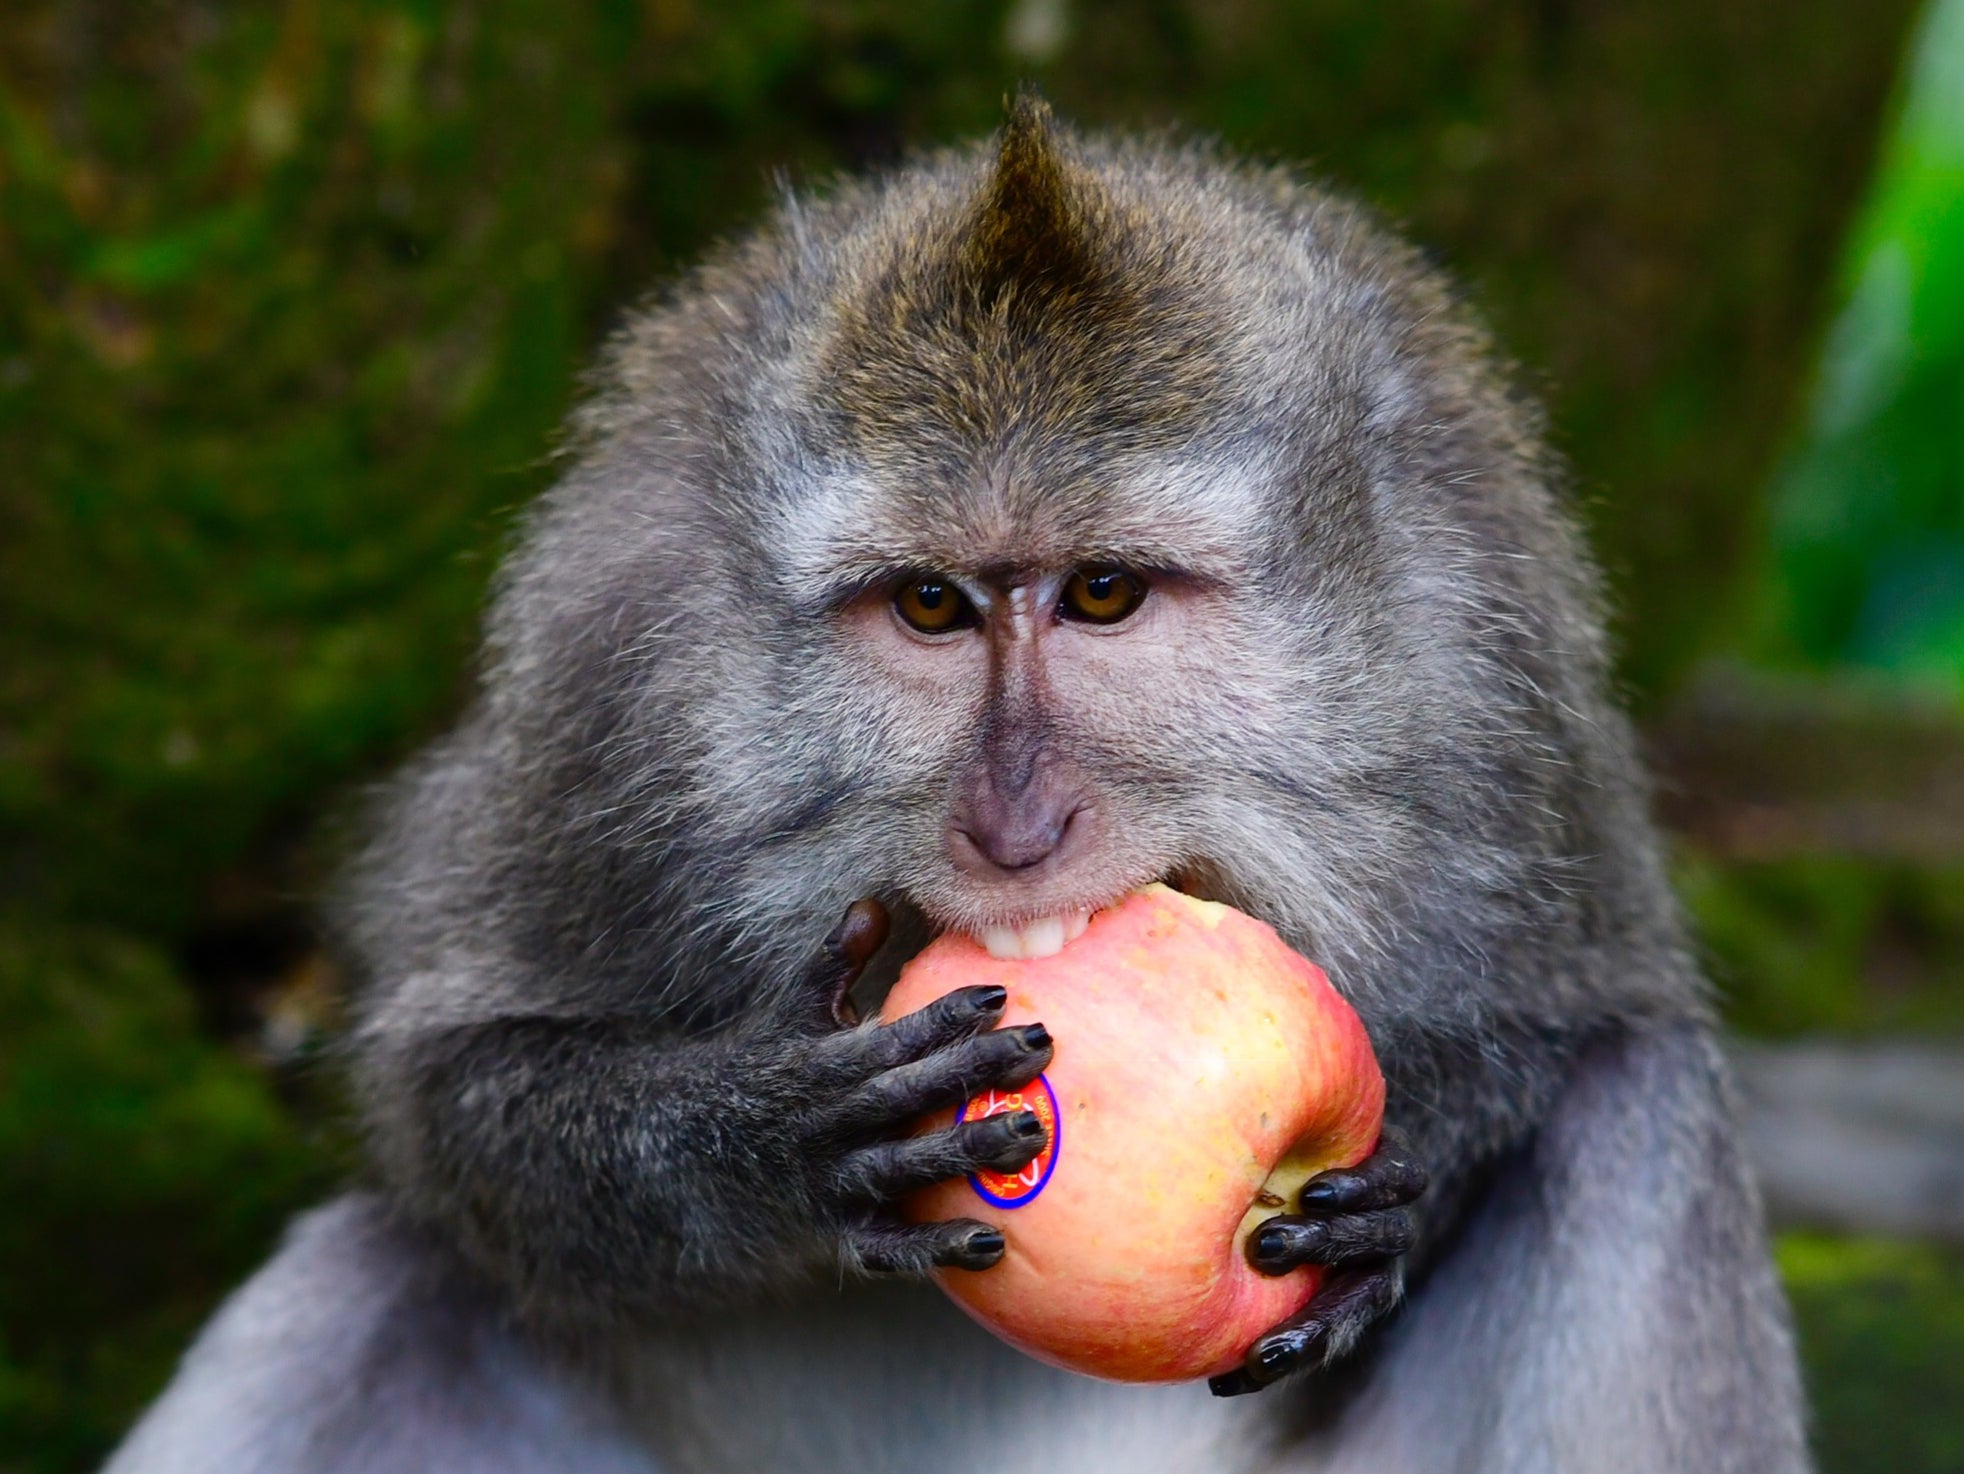 Macaques had a preference for which reward they were given in exchange for valuables